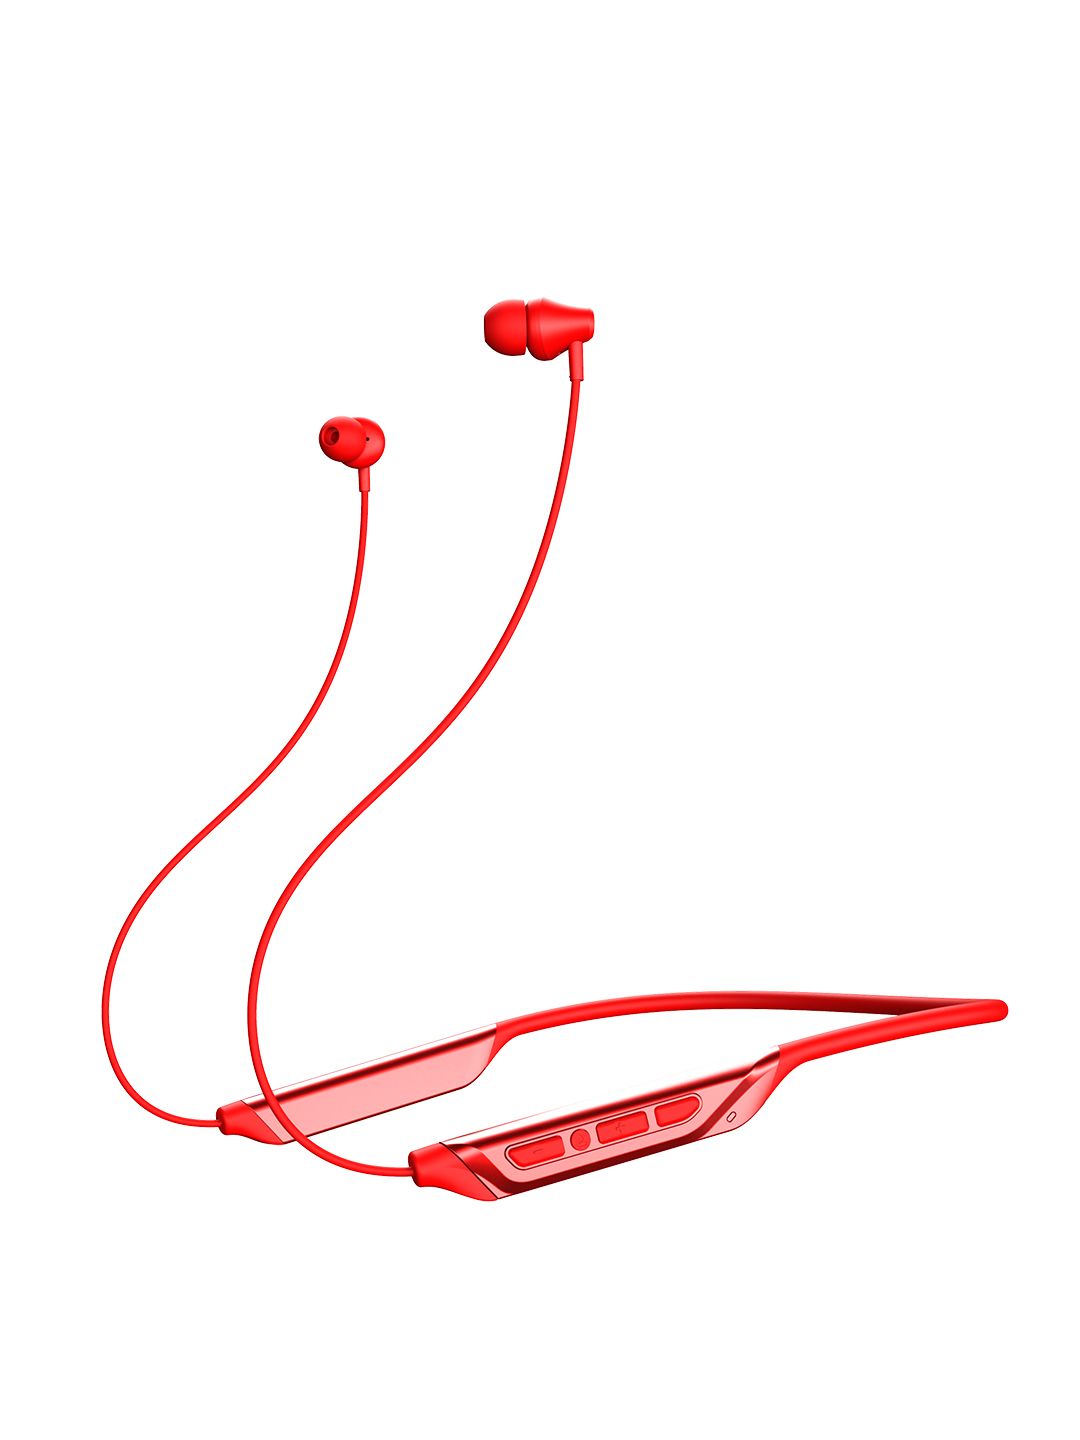 boAt Rockerz 375 M Wireless Bluetooth in Ear Neckband Headphone with Mic - Raging Red Price in India